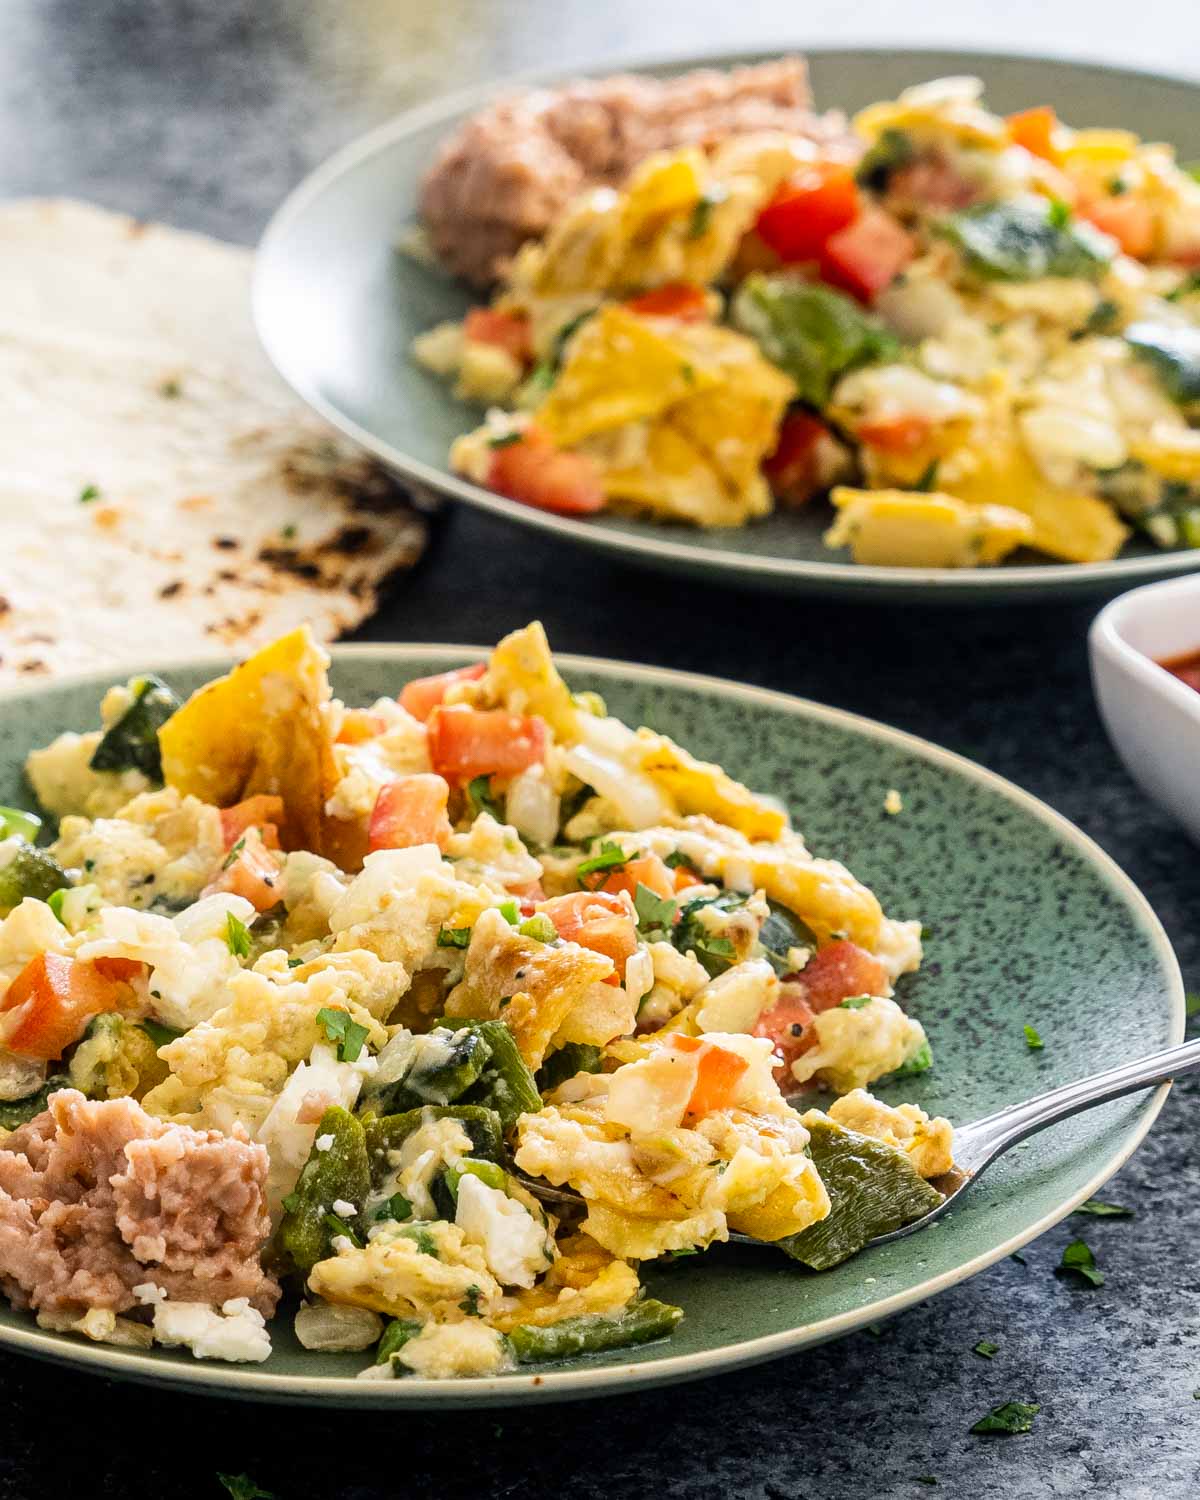 migas in a green plate with a fork.